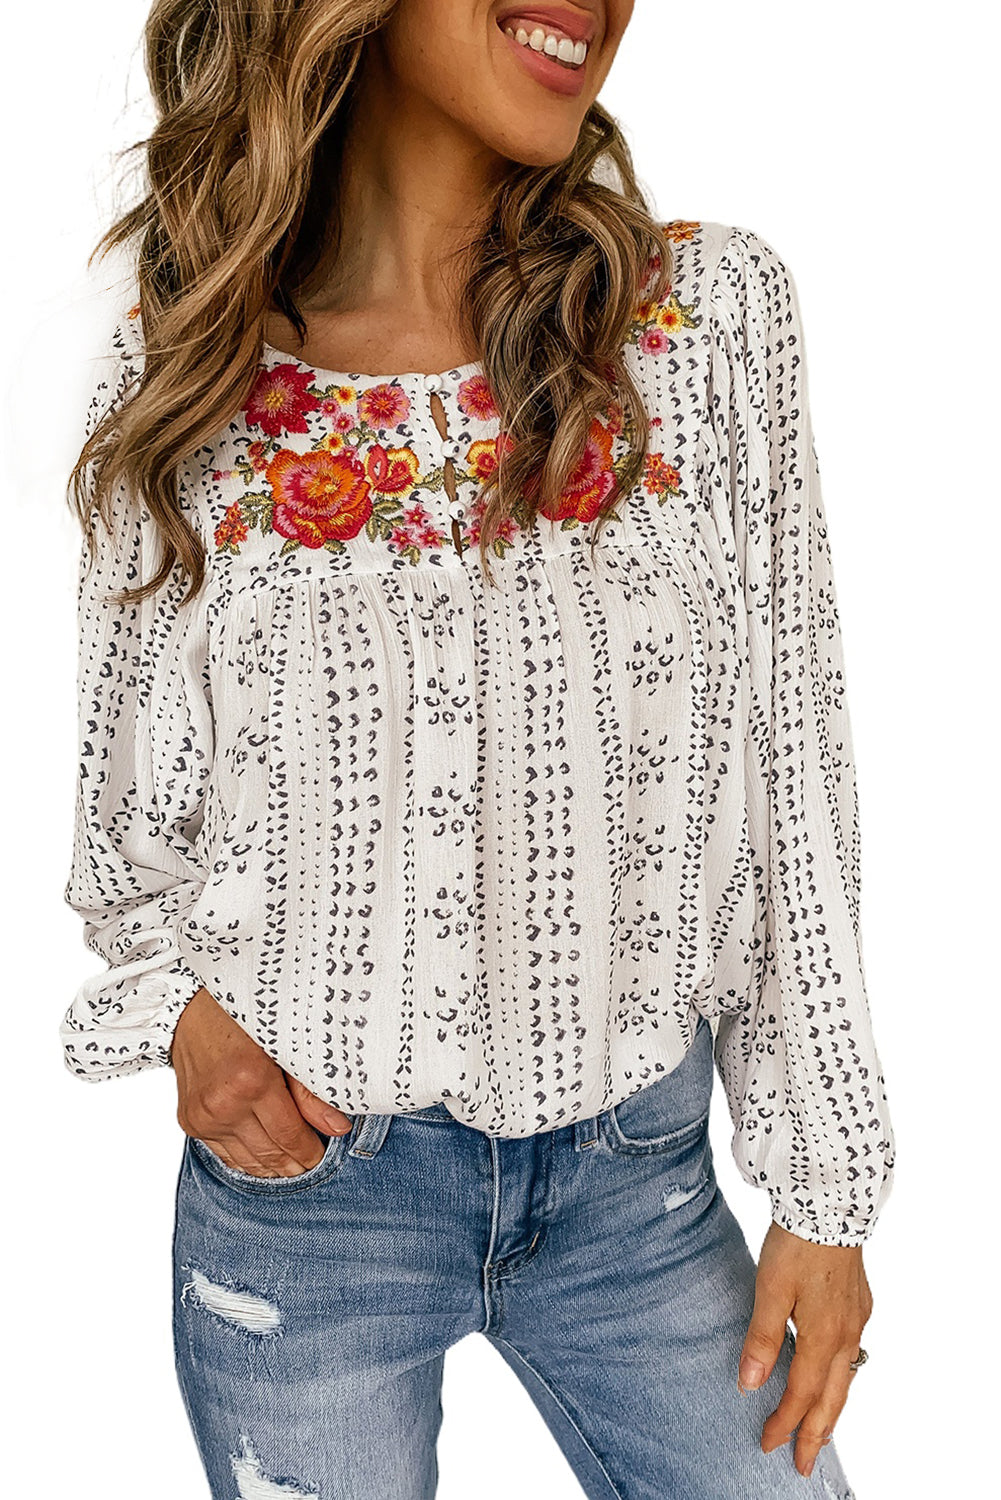 Beige Bohemian Floral Embroidered Printed Buttons Front Blouse